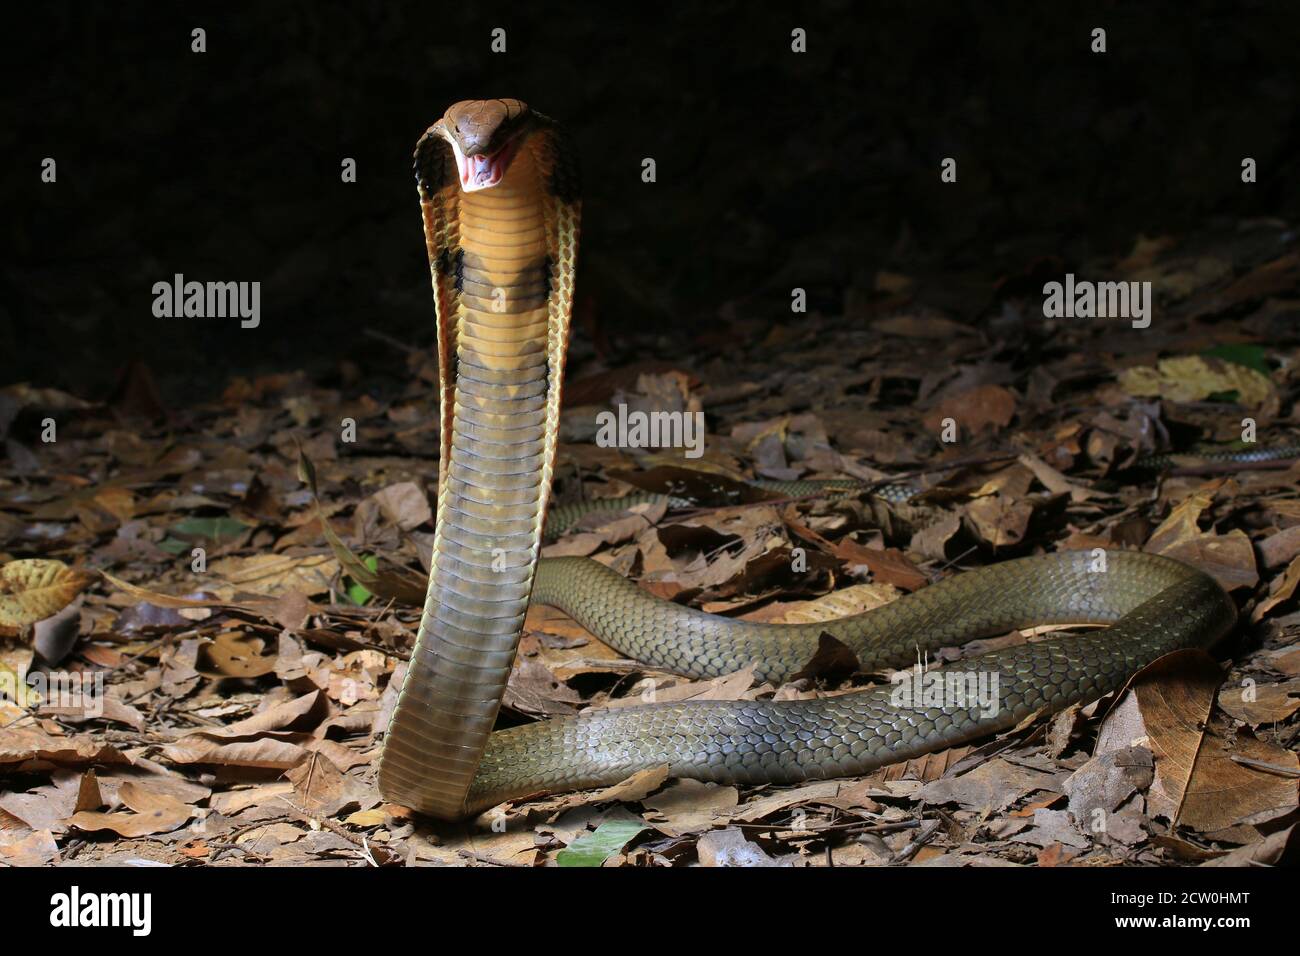 A young King cobra, Ophiophagus hannah is the world longest venomous snake. Stock Photo